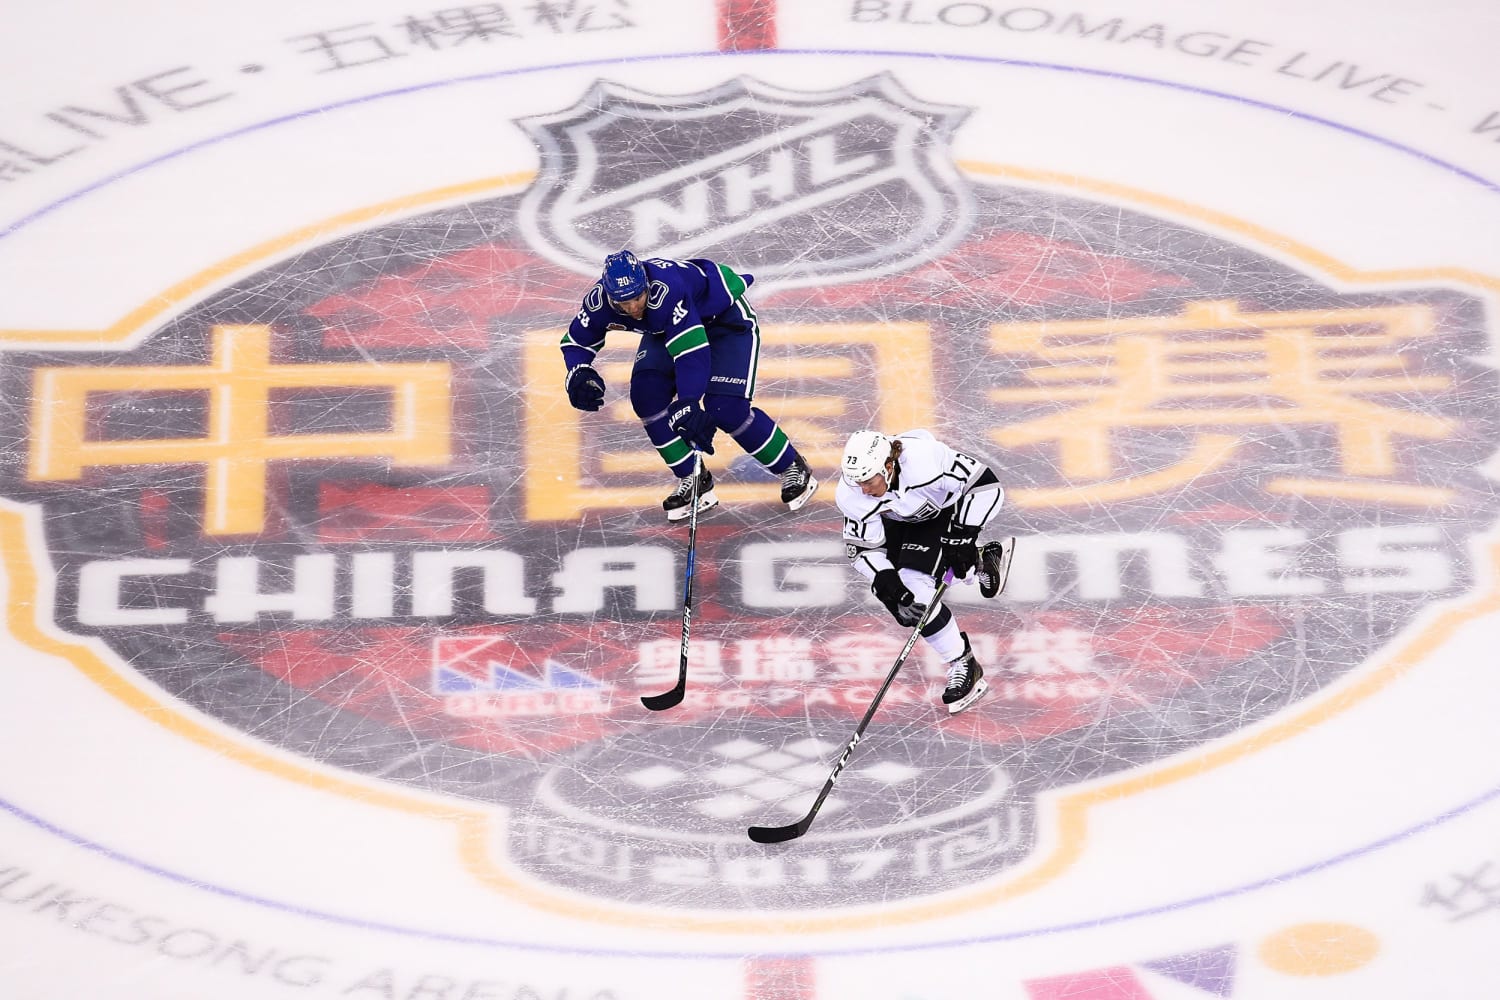 Ahead of 2022 Beijing Winter Olympics, NHL Works to Grow Hockey in China